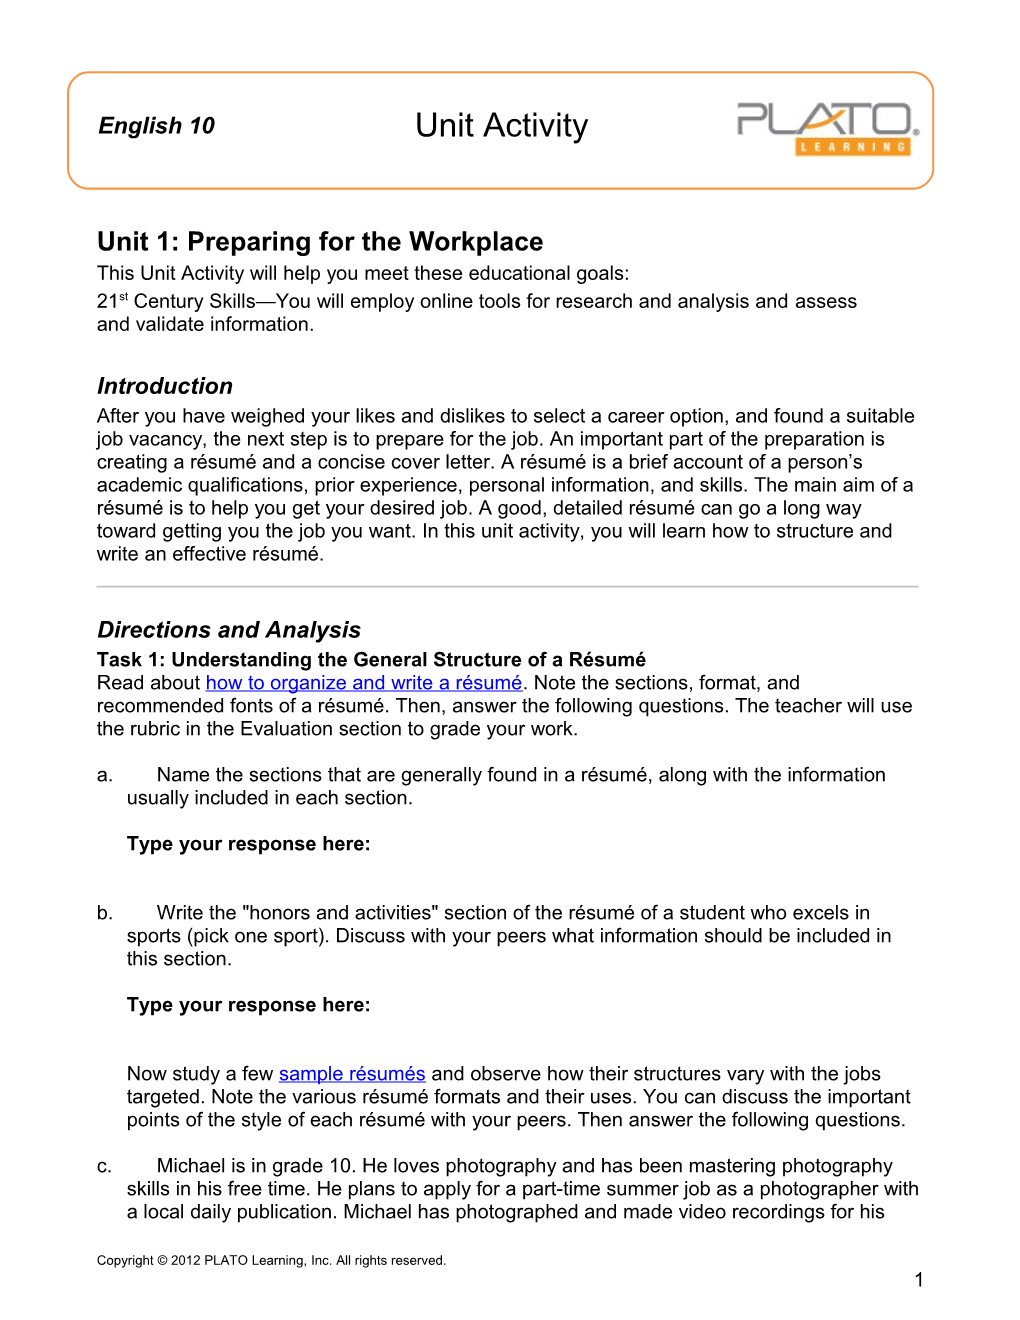 Unit 1: Preparing for the Workplace